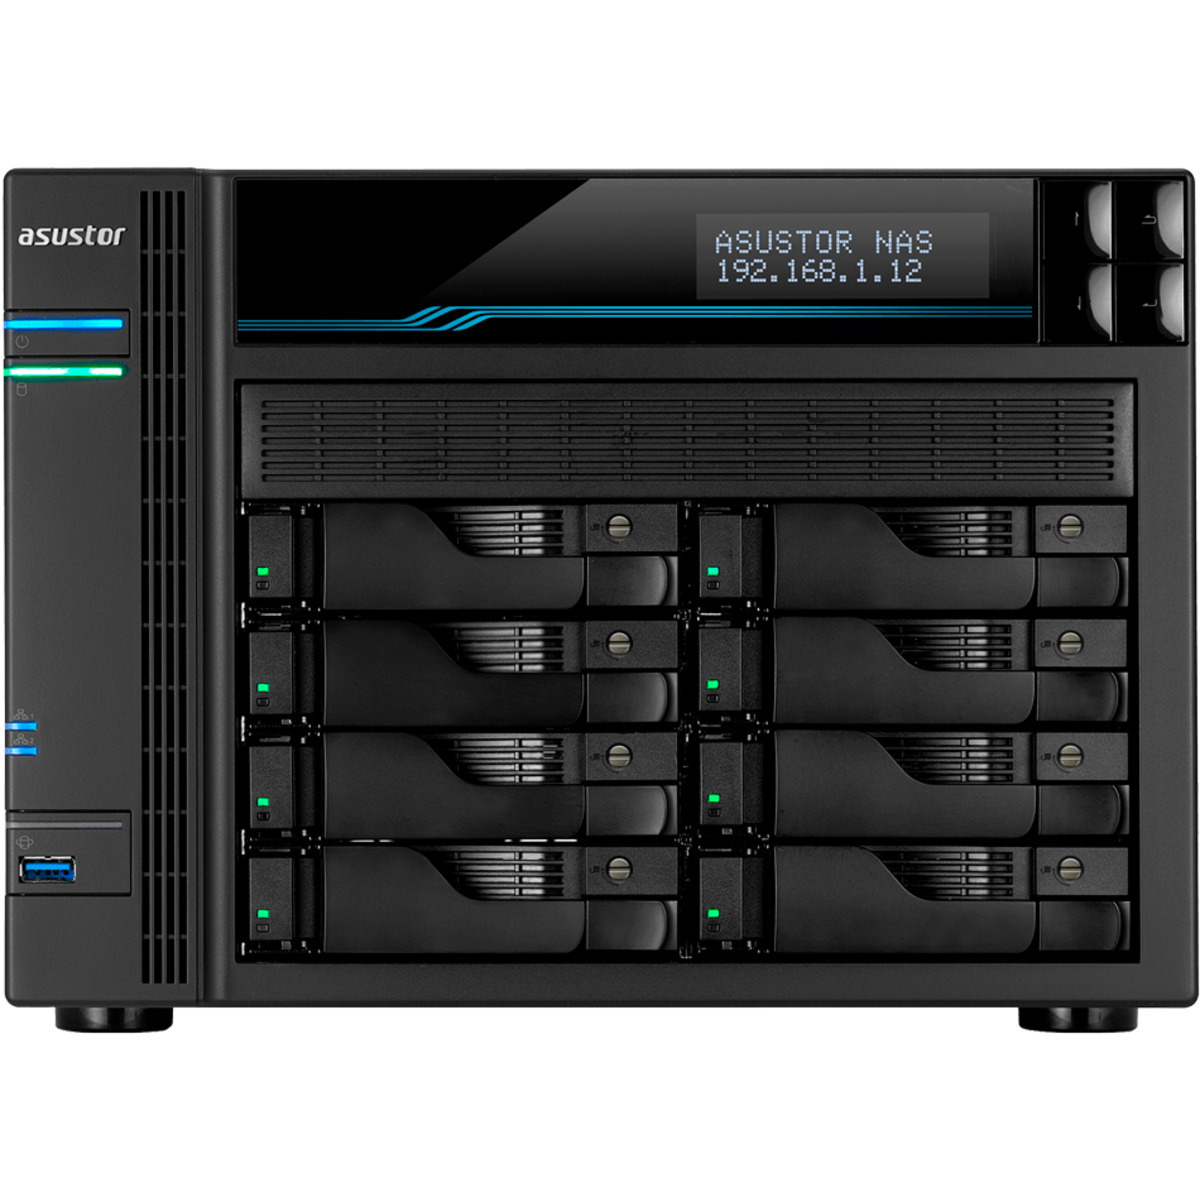 ASUSTOR AS6508T Lockerstor 8 128tb 8-Bay Desktop Multimedia / Power User / Business NAS - Network Attached Storage Device 8x16tb Seagate IronWolf Pro ST16000NT001 3.5 7200rpm SATA 6Gb/s HDD NAS Class Drives Installed - Burn-In Tested - ON SALE - FREE RAM UPGRADE AS6508T Lockerstor 8